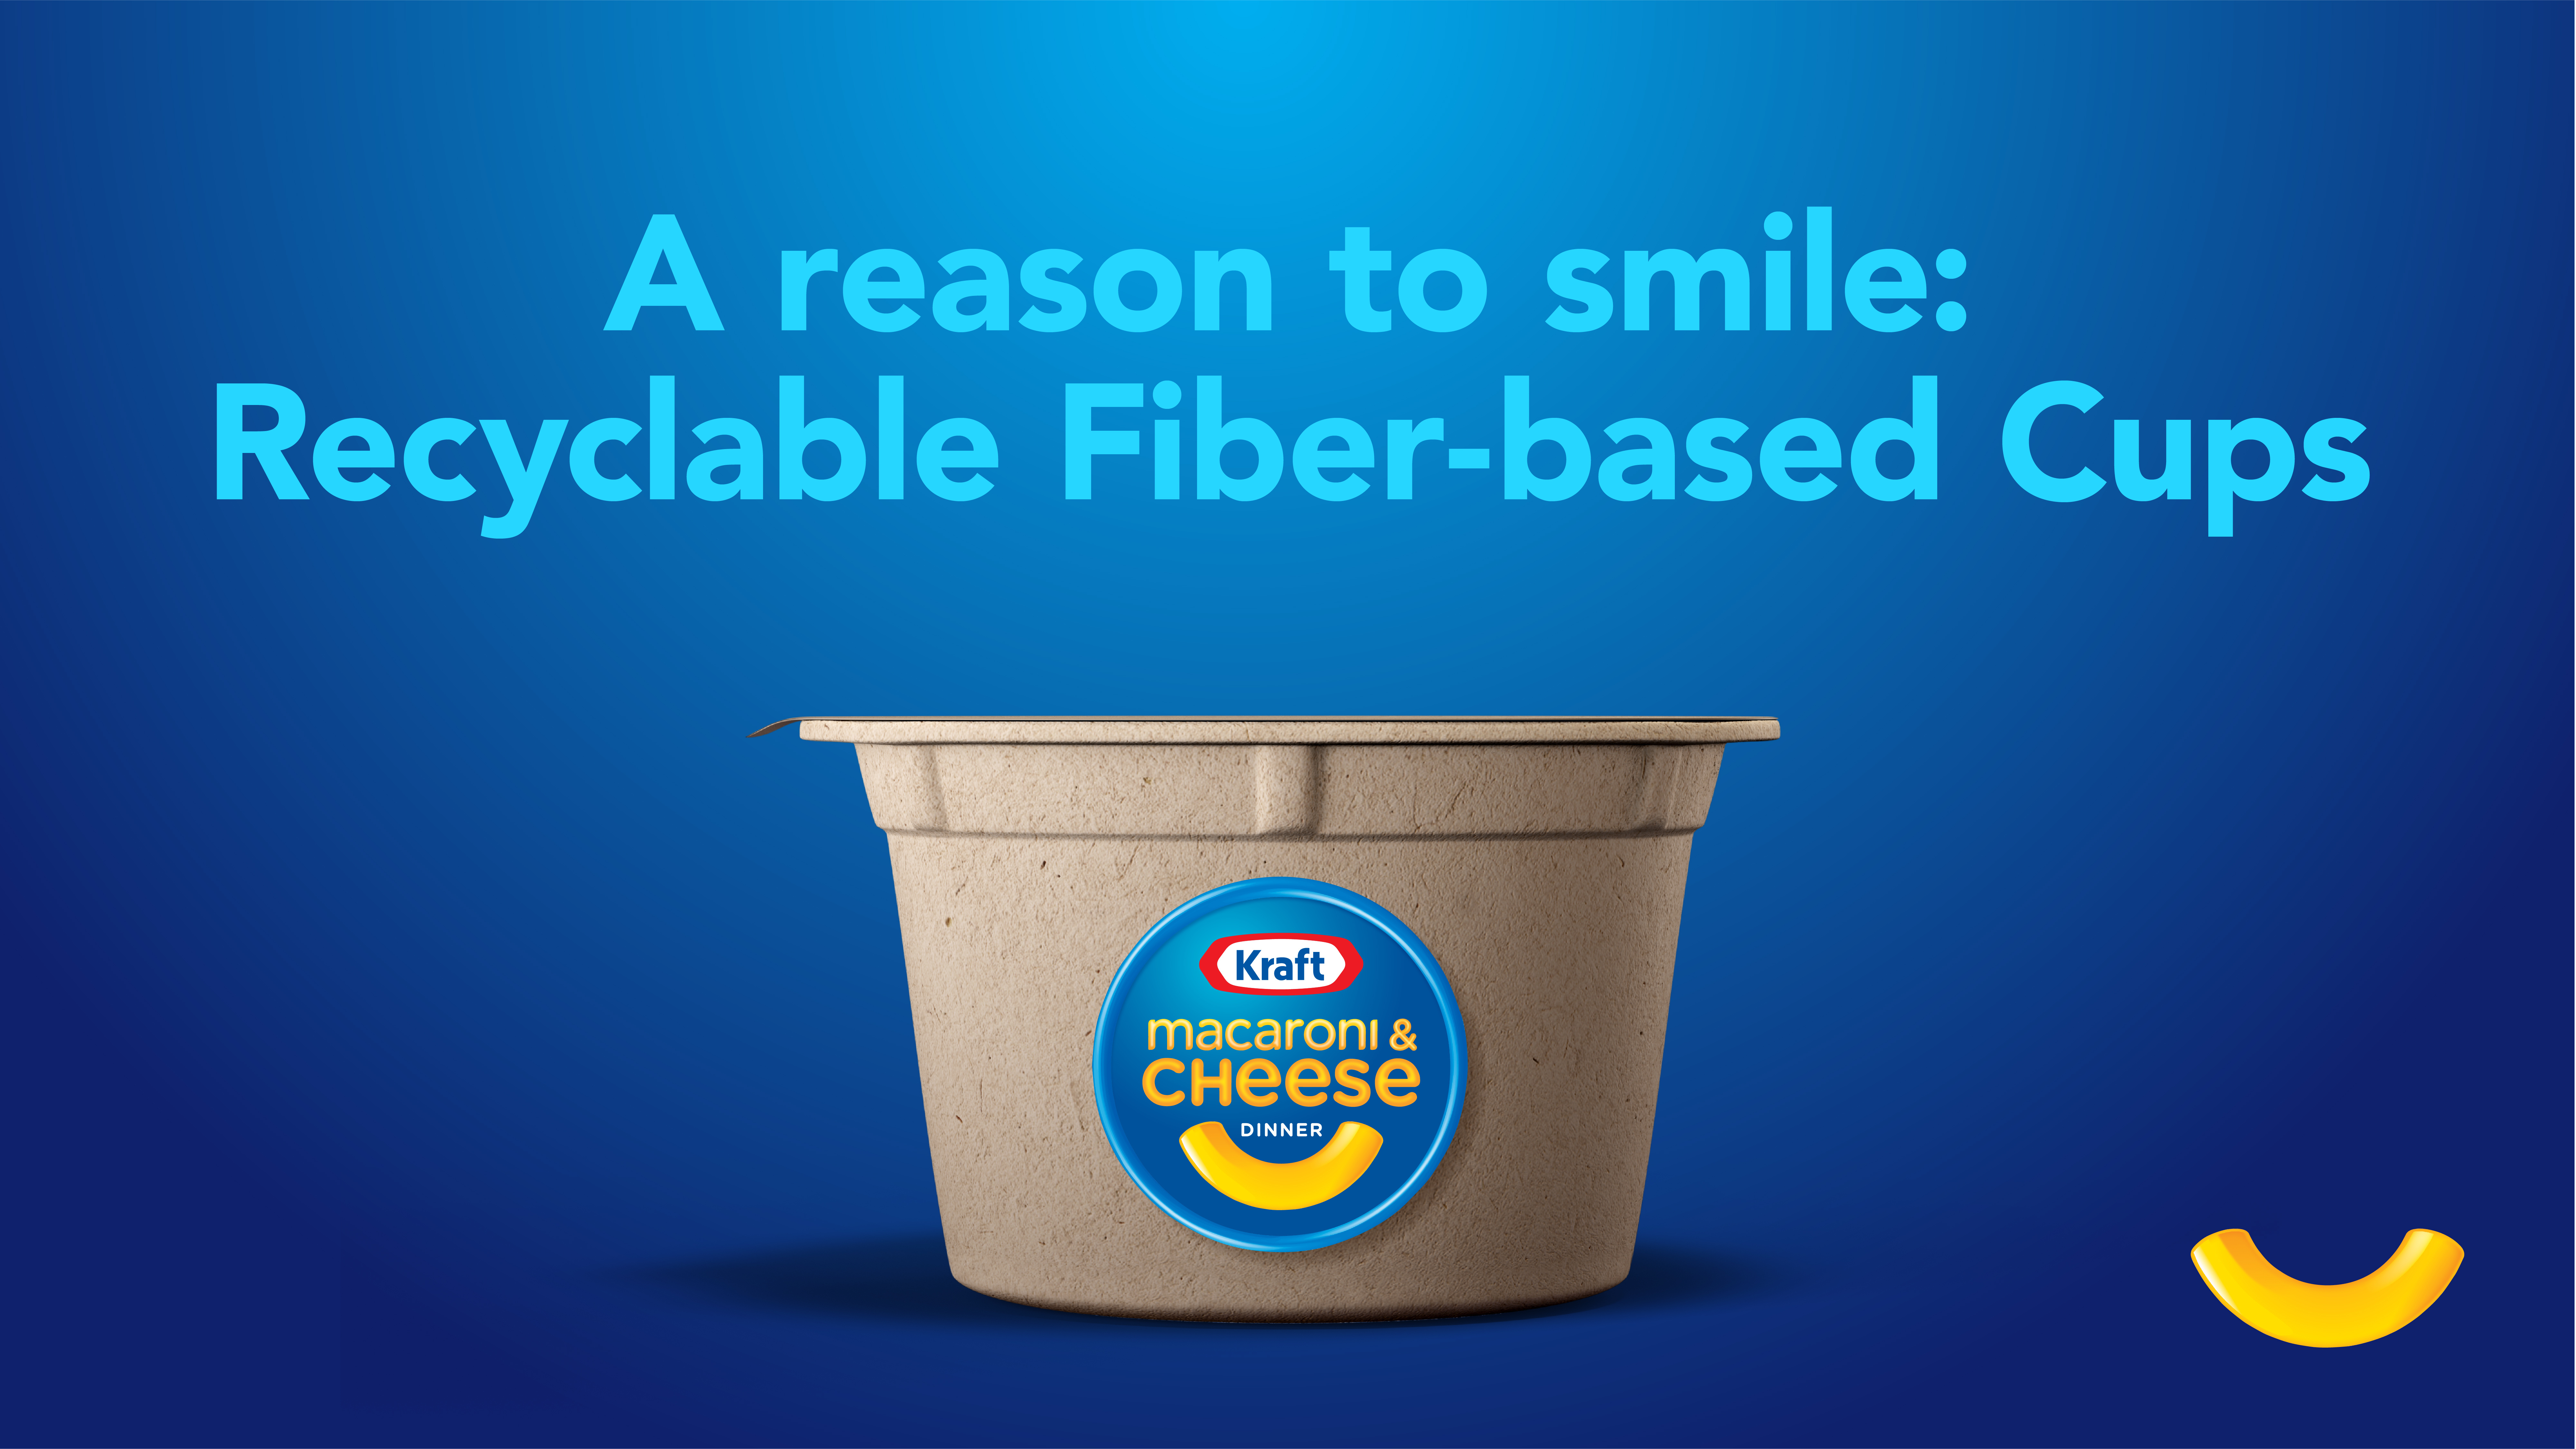 Kraft Heinz says this is the first-ever recyclable fiber-based microwavable cup